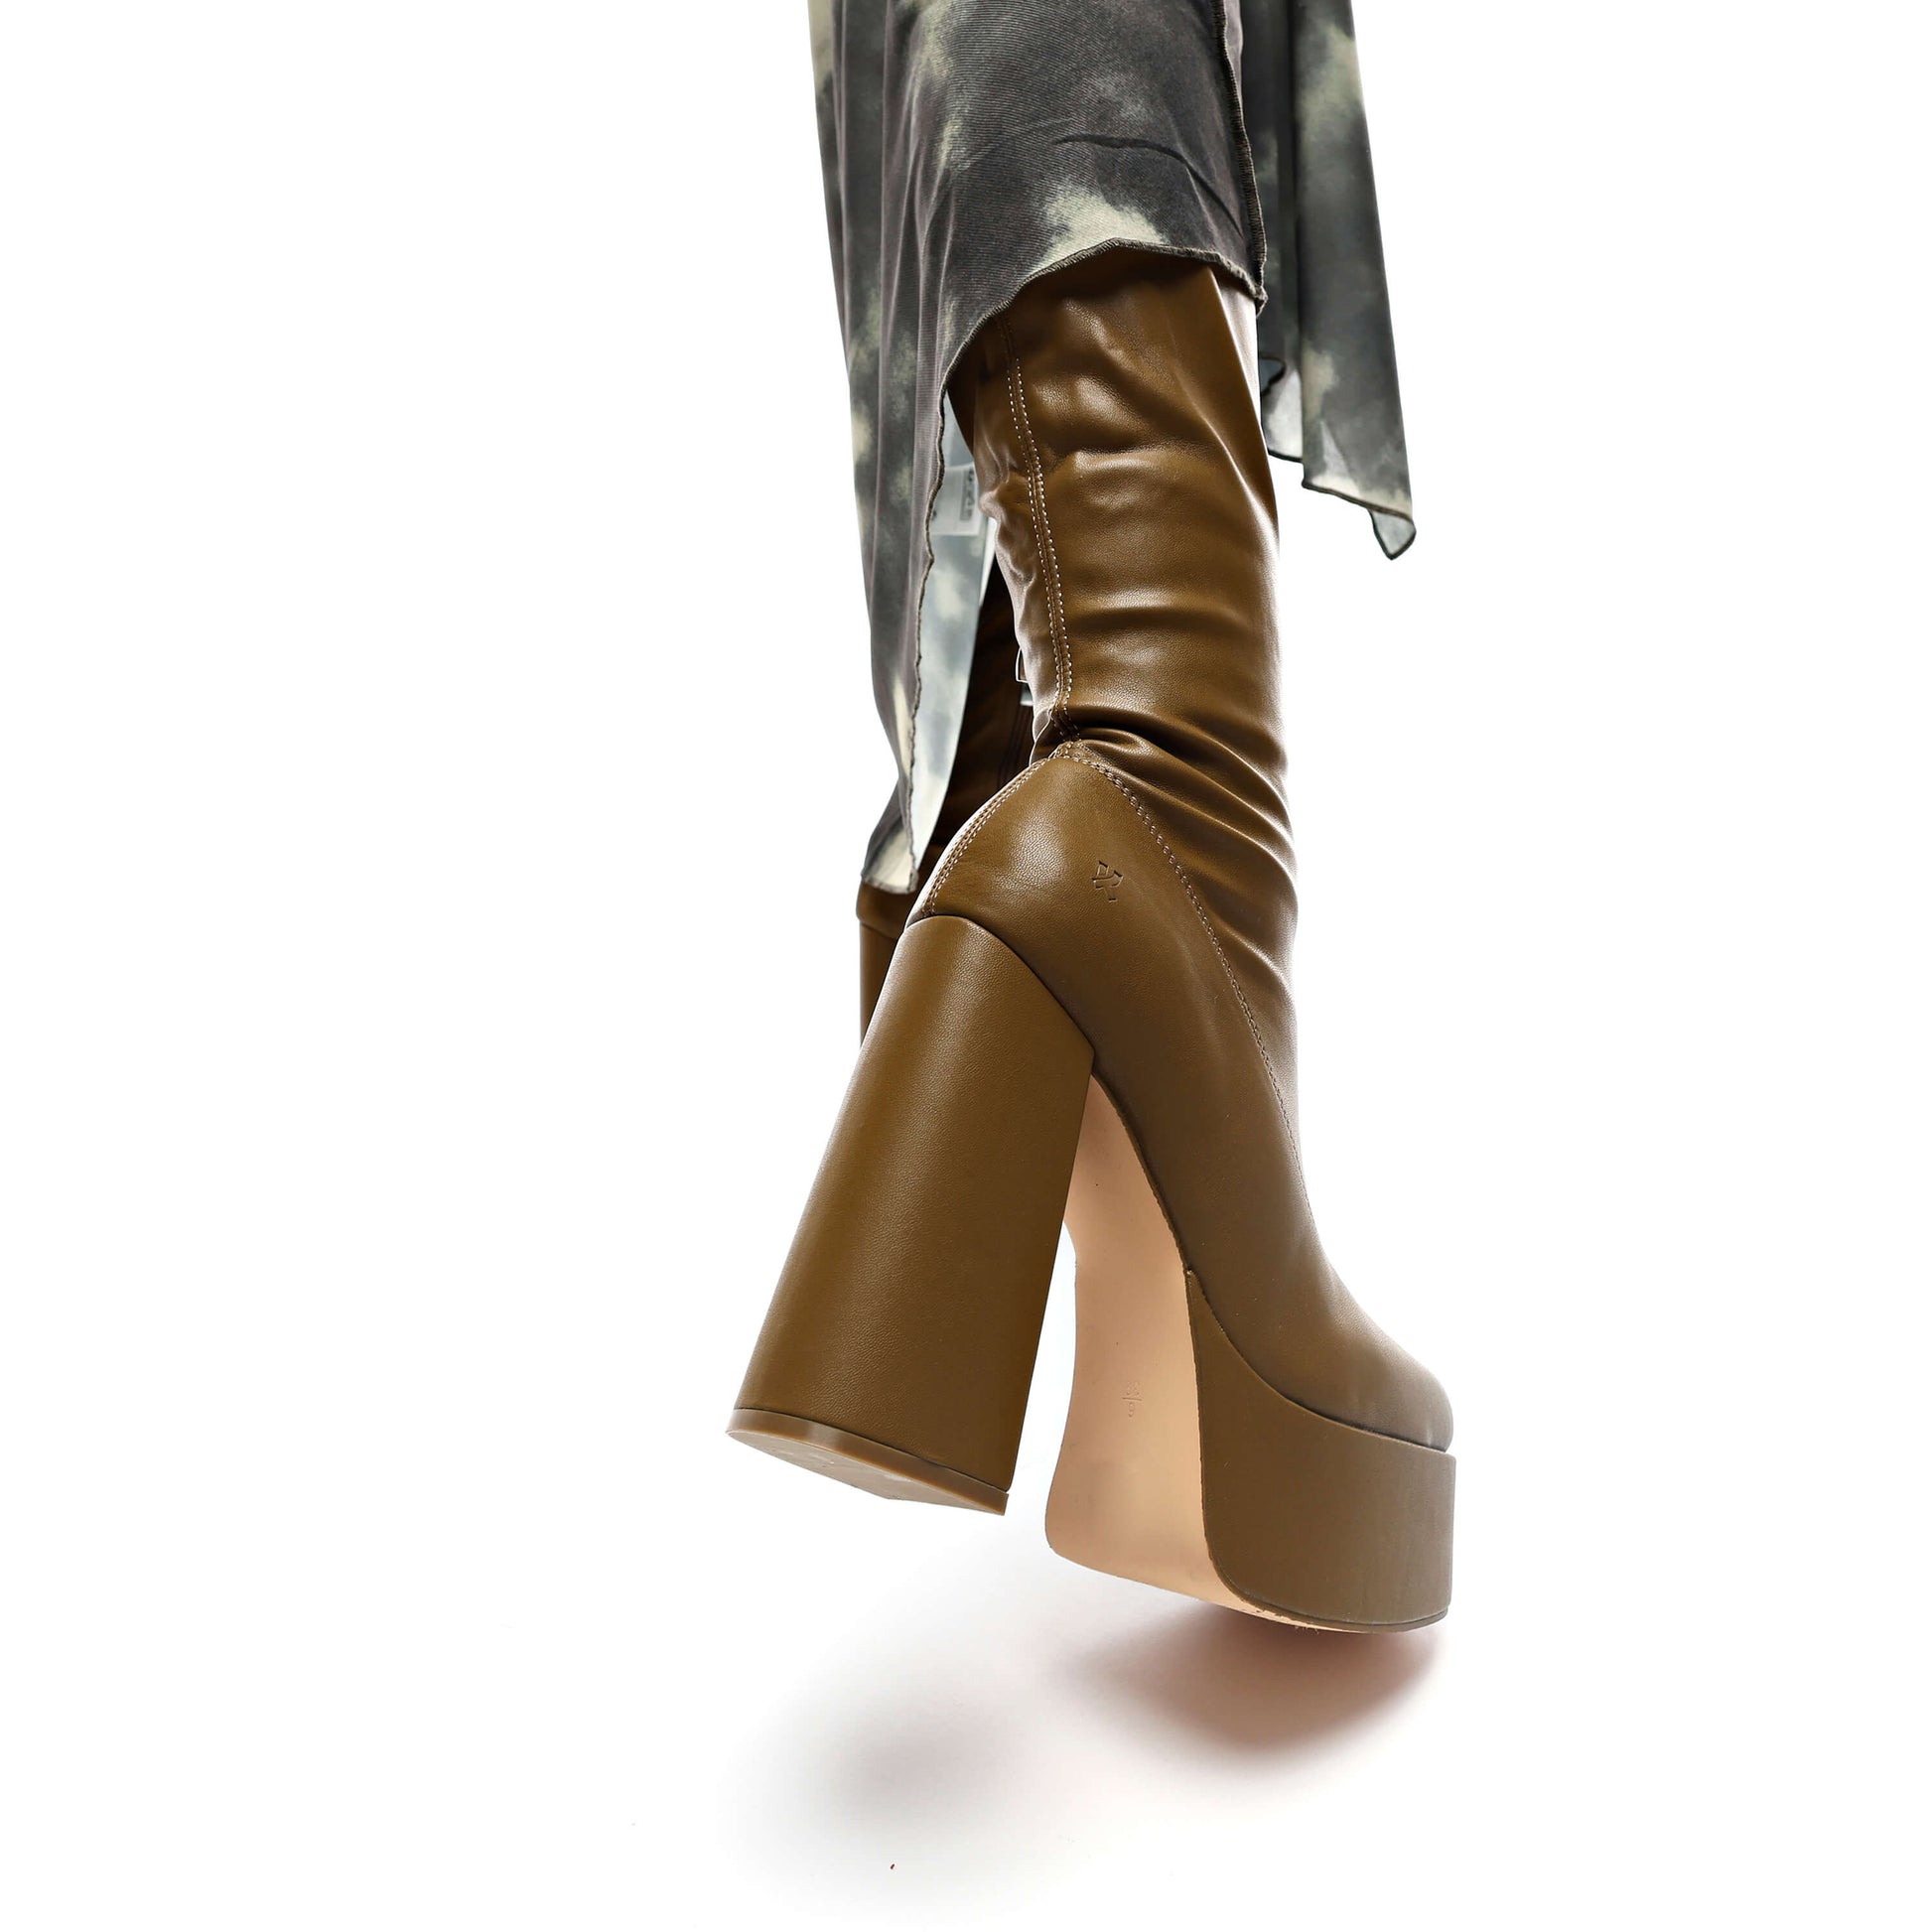 The Redemption Stretch Thigh High Boots - Khaki - Long Boots - KOI Footwear - Khaki - Model Side View